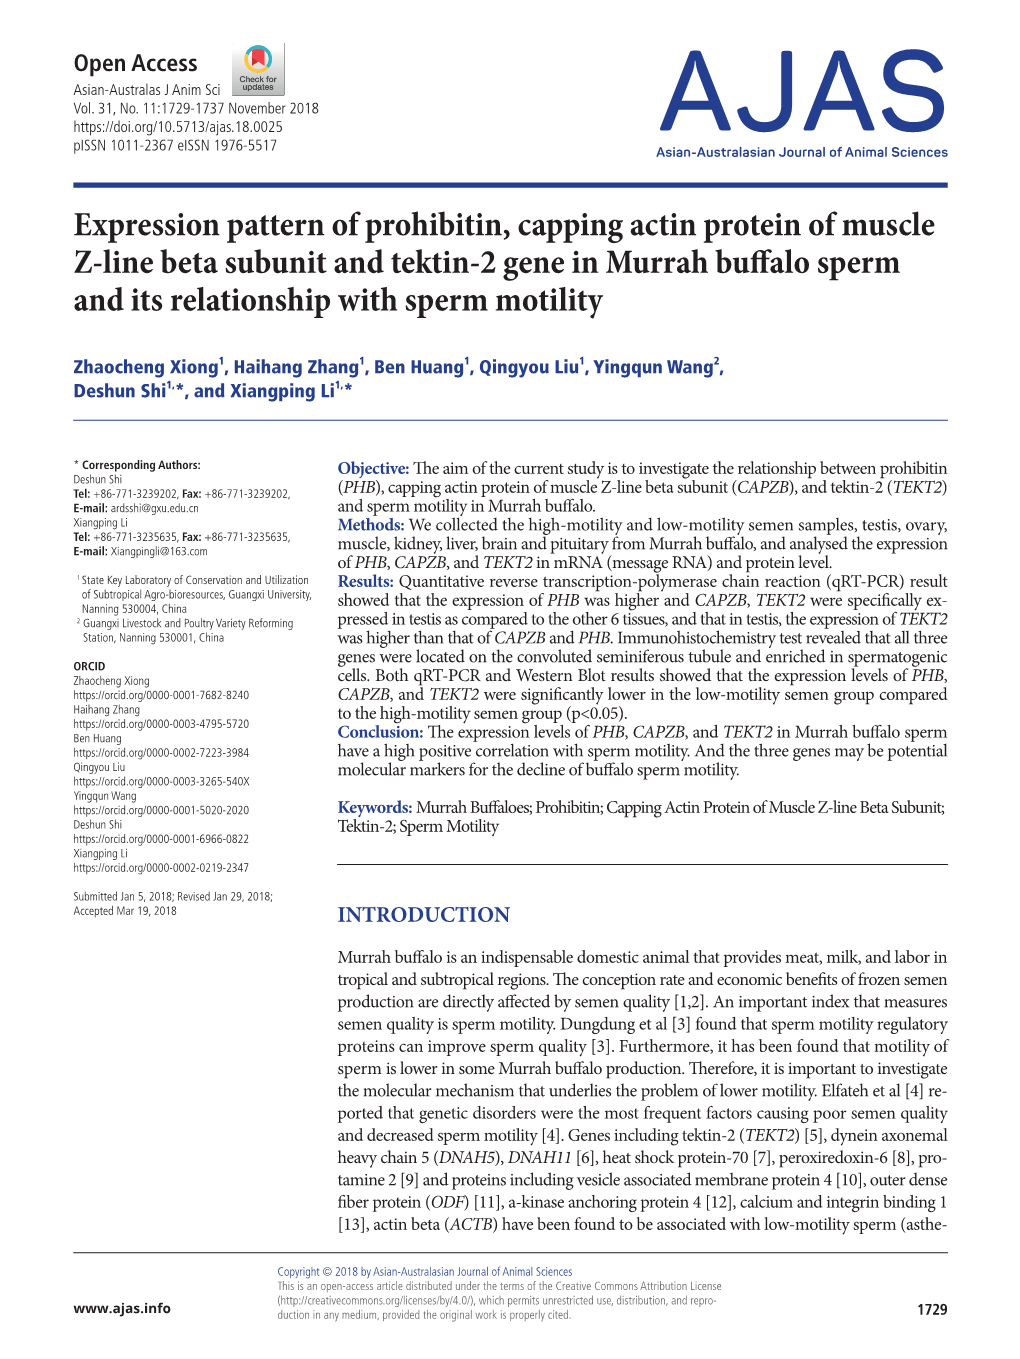 Expression Pattern of Prohibitin, Capping Actin Protein of Muscle Z